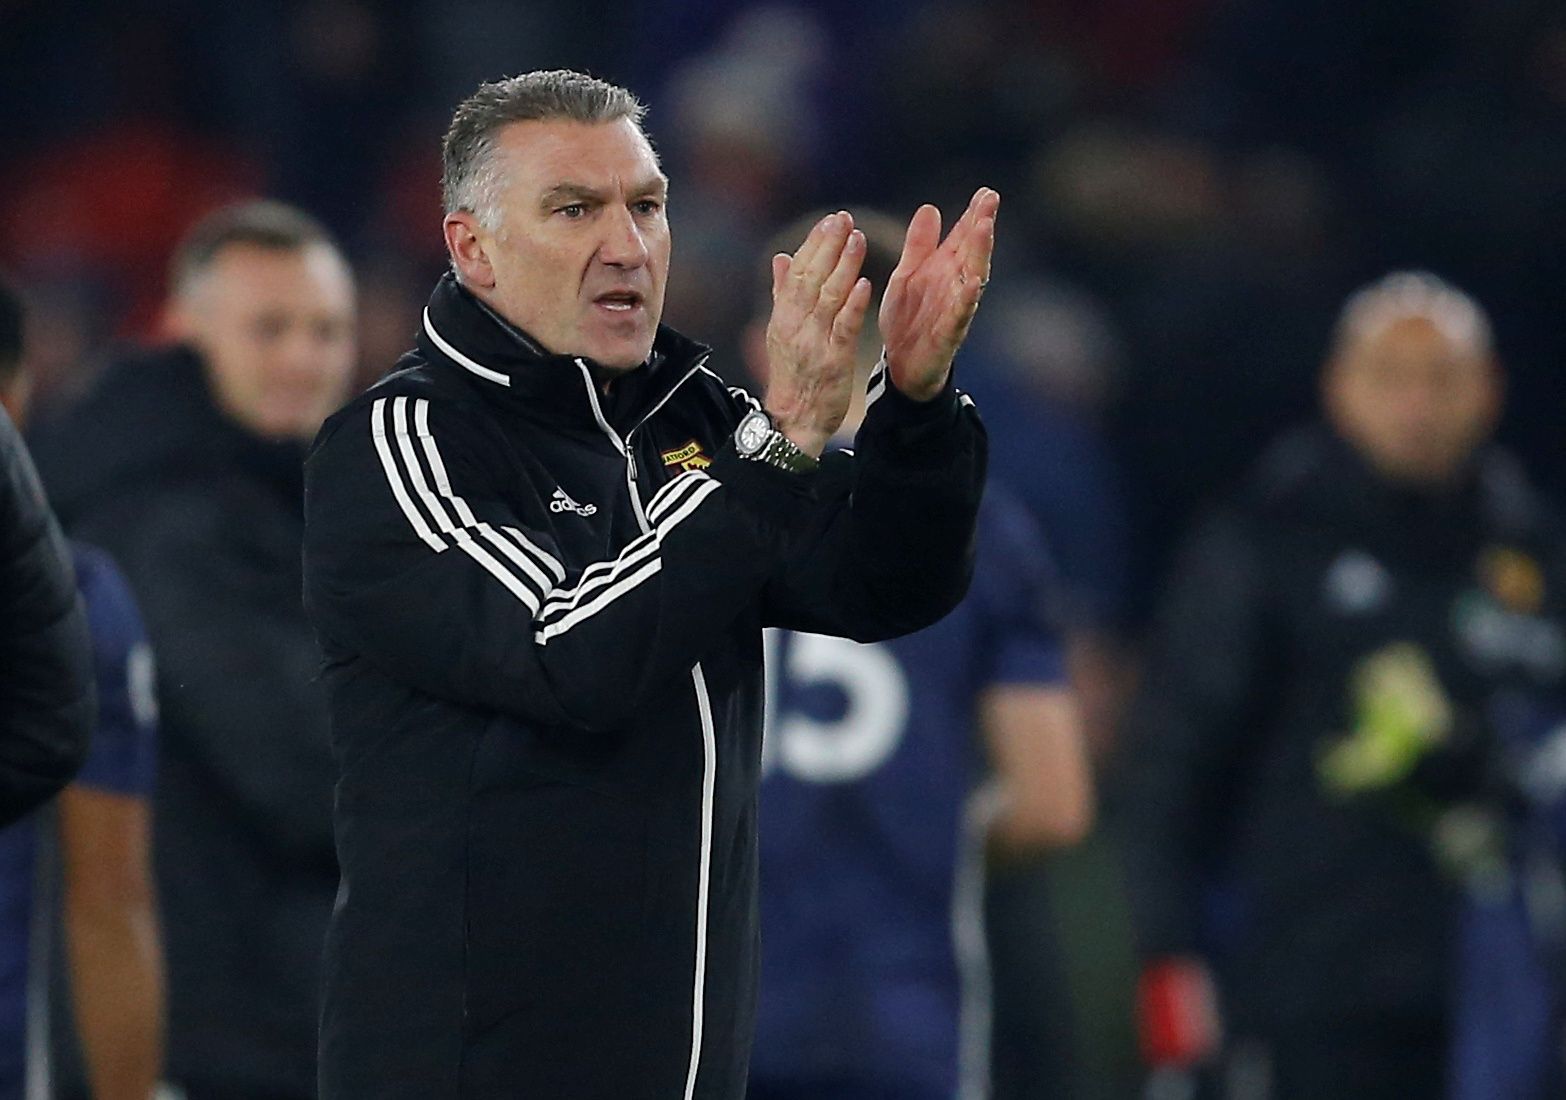 Soccer Football - Premier League - Sheffield United v Watford- Bramall Lane, Sheffield, Britain - December 26, 2019  Watford manager Nigel Pearson applauds fans after the match           Action Images via Reuters/Craig Brough  EDITORIAL USE ONLY. No use with unauthorized audio, video, data, fixture lists, club/league logos or 